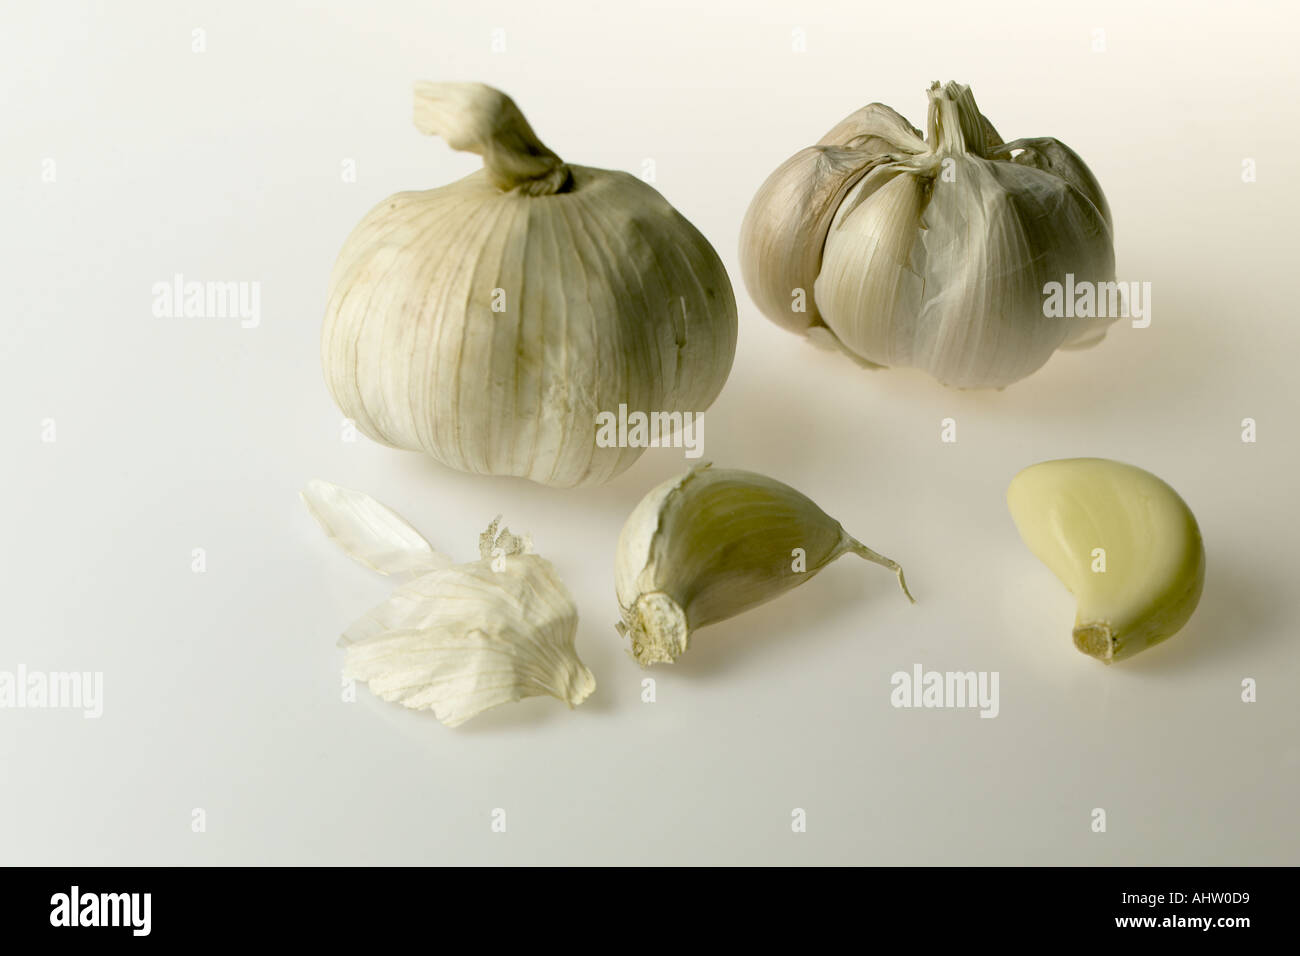 AAD 91745 Spice herb ayurvedic naturopathy healthy vegetable garlic smelly pungent pods two full table top on white background Stock Photo